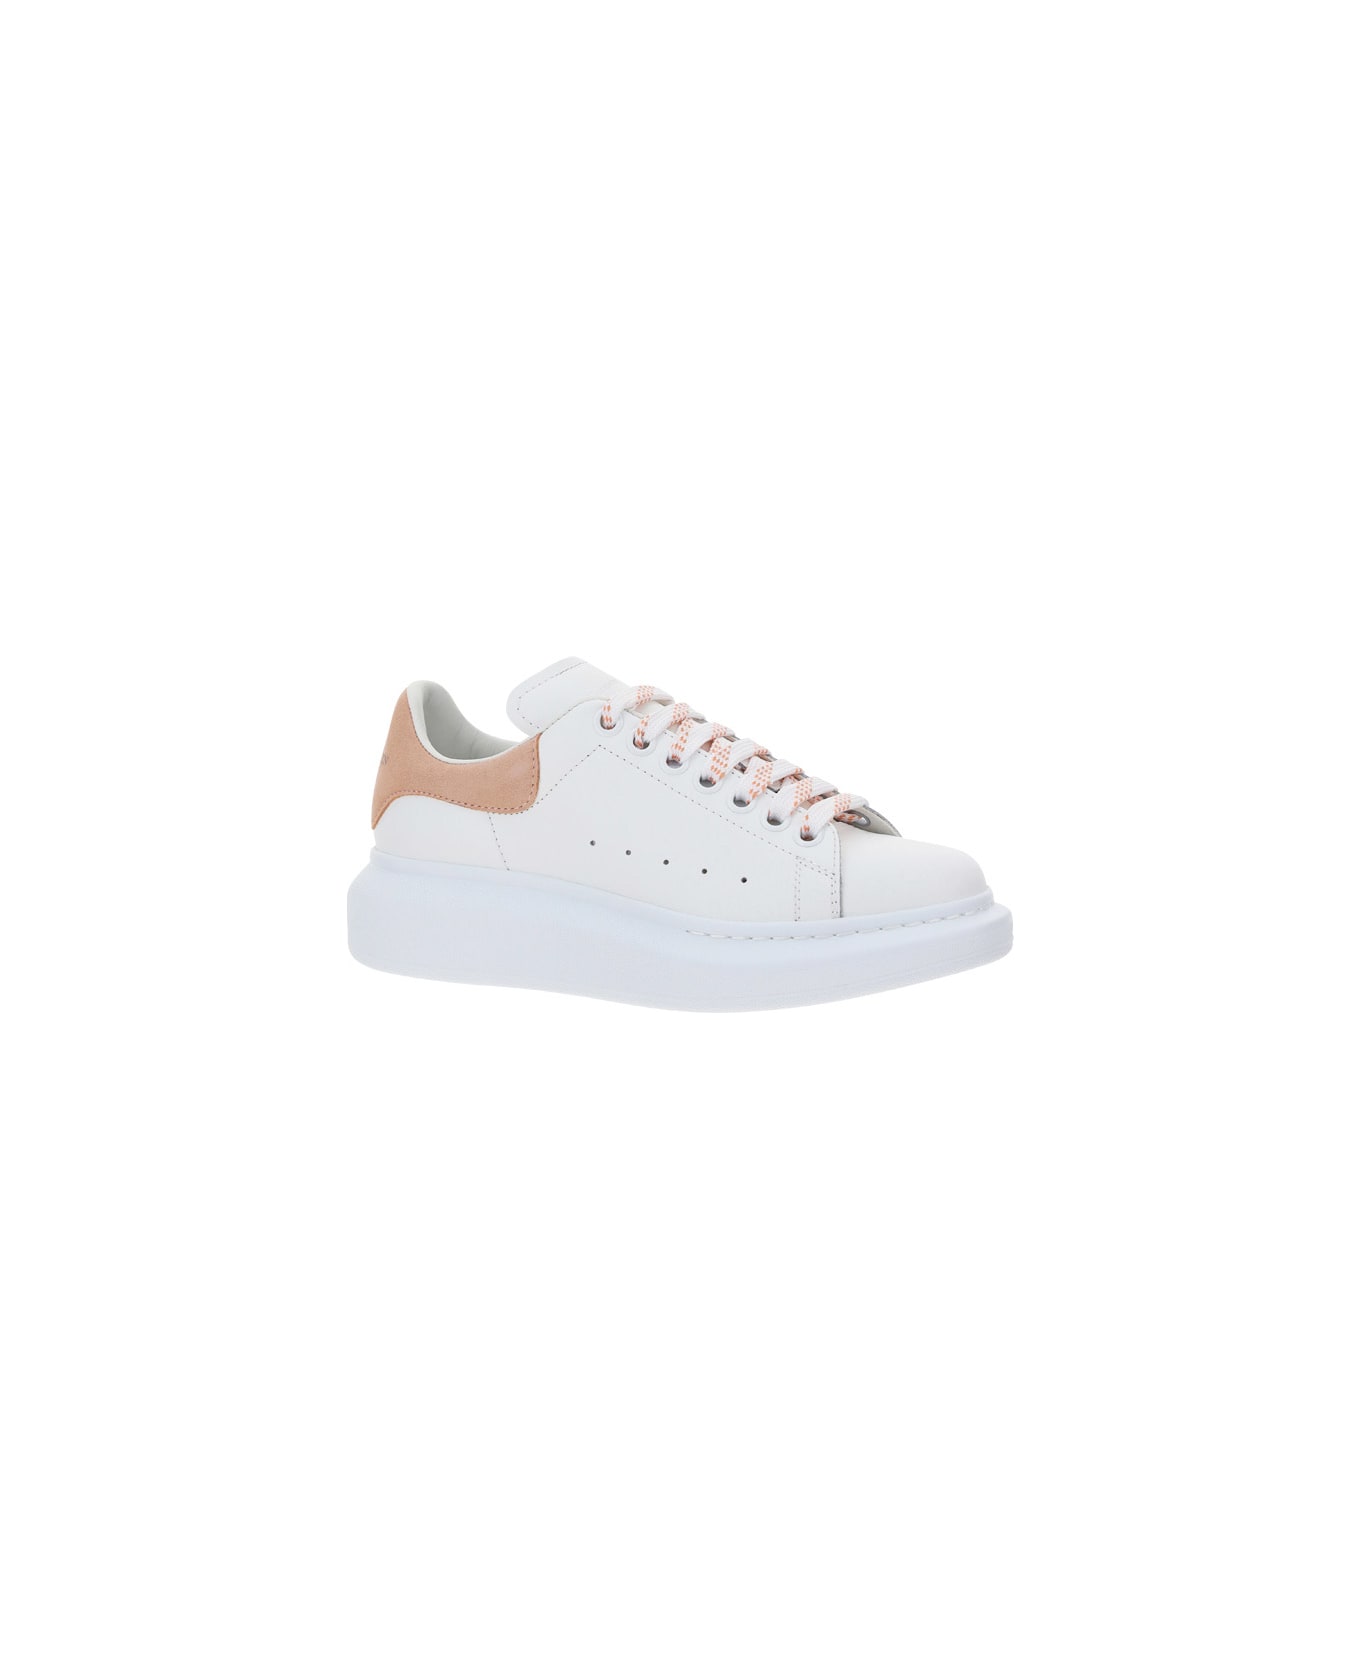 Common McQueen Sneakers - White/madder